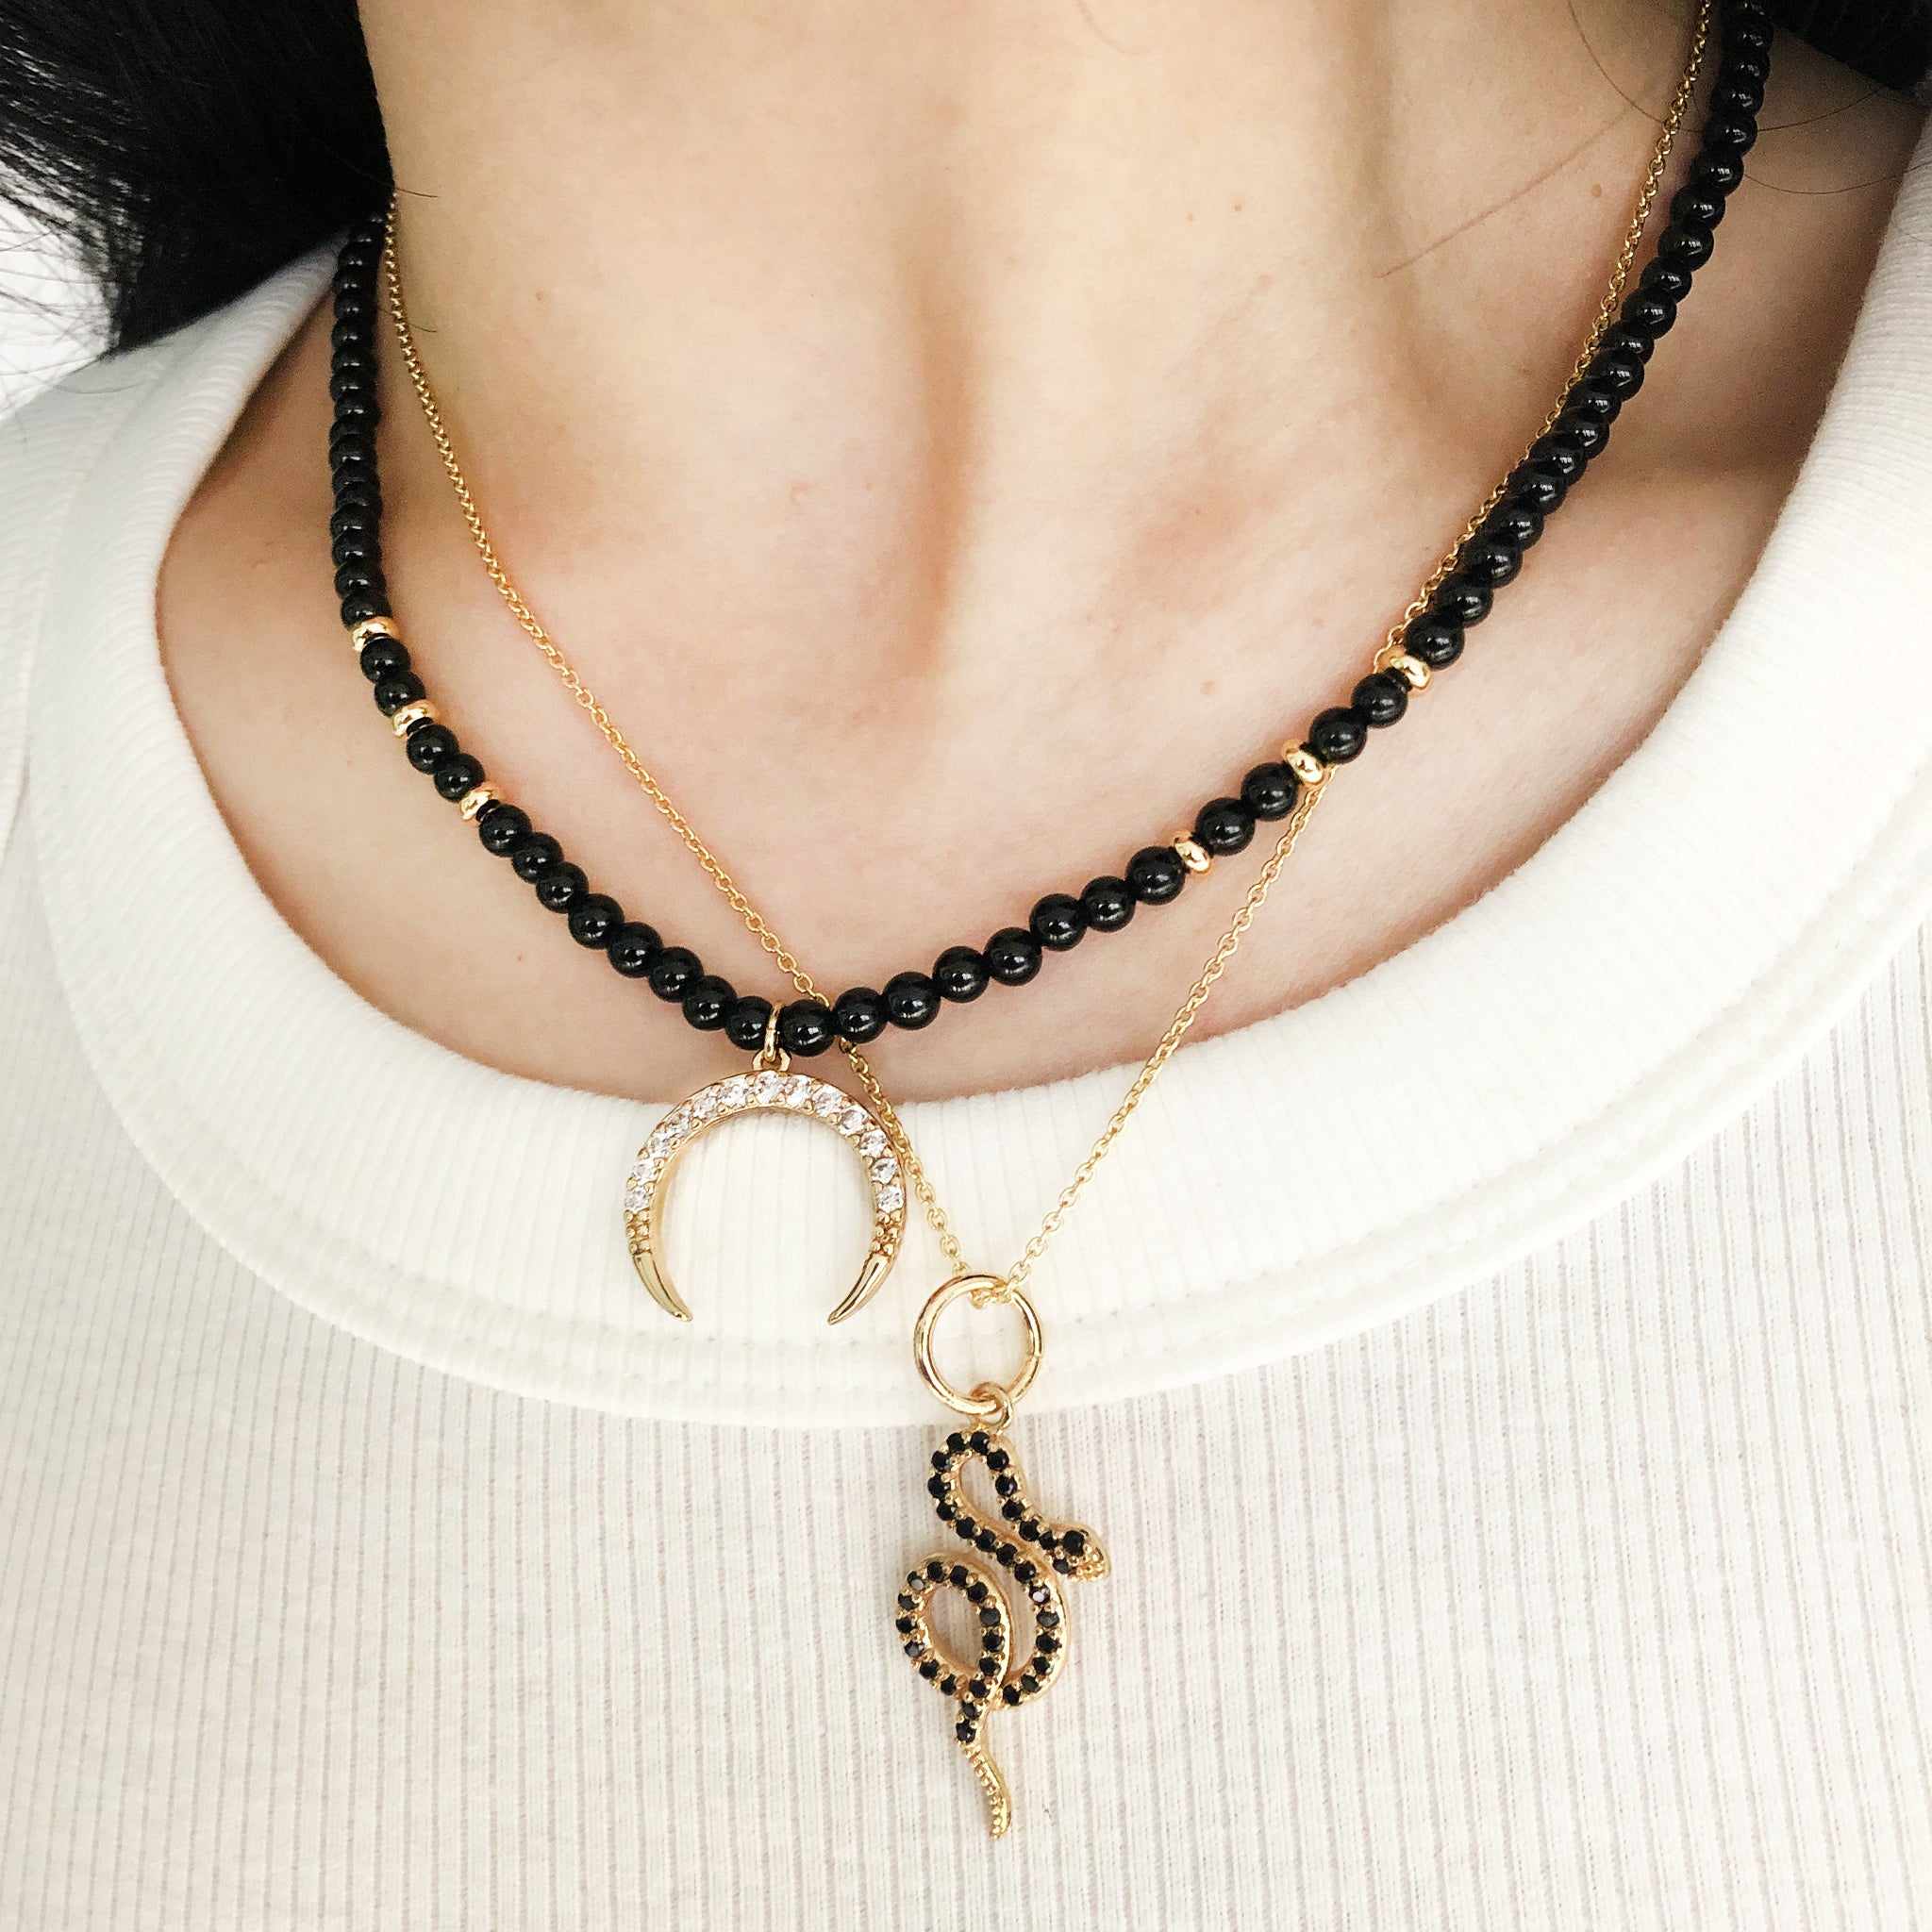 Obsidian Necklace with Crescent Moon Pendant – Mementomoridesignsnyc